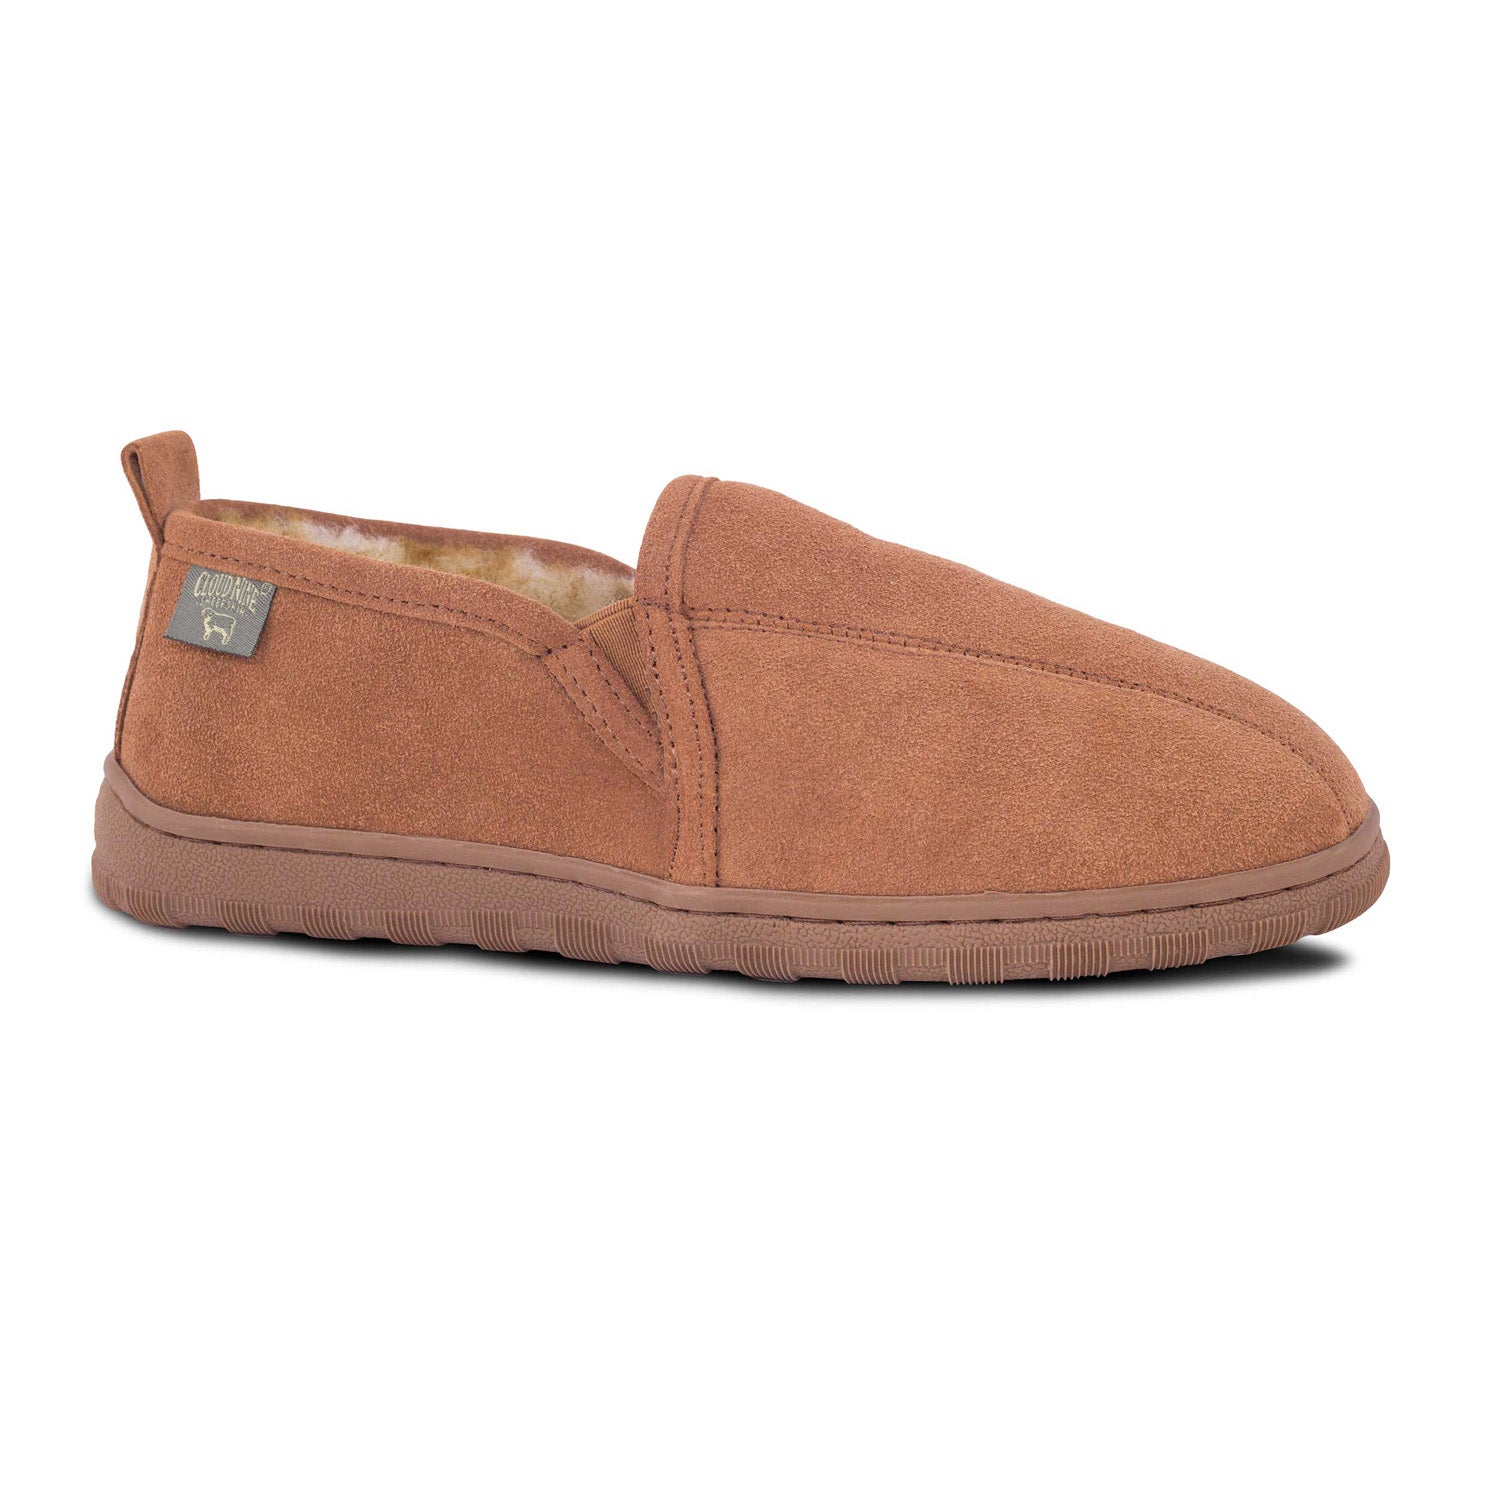 romeo slippers leather sole